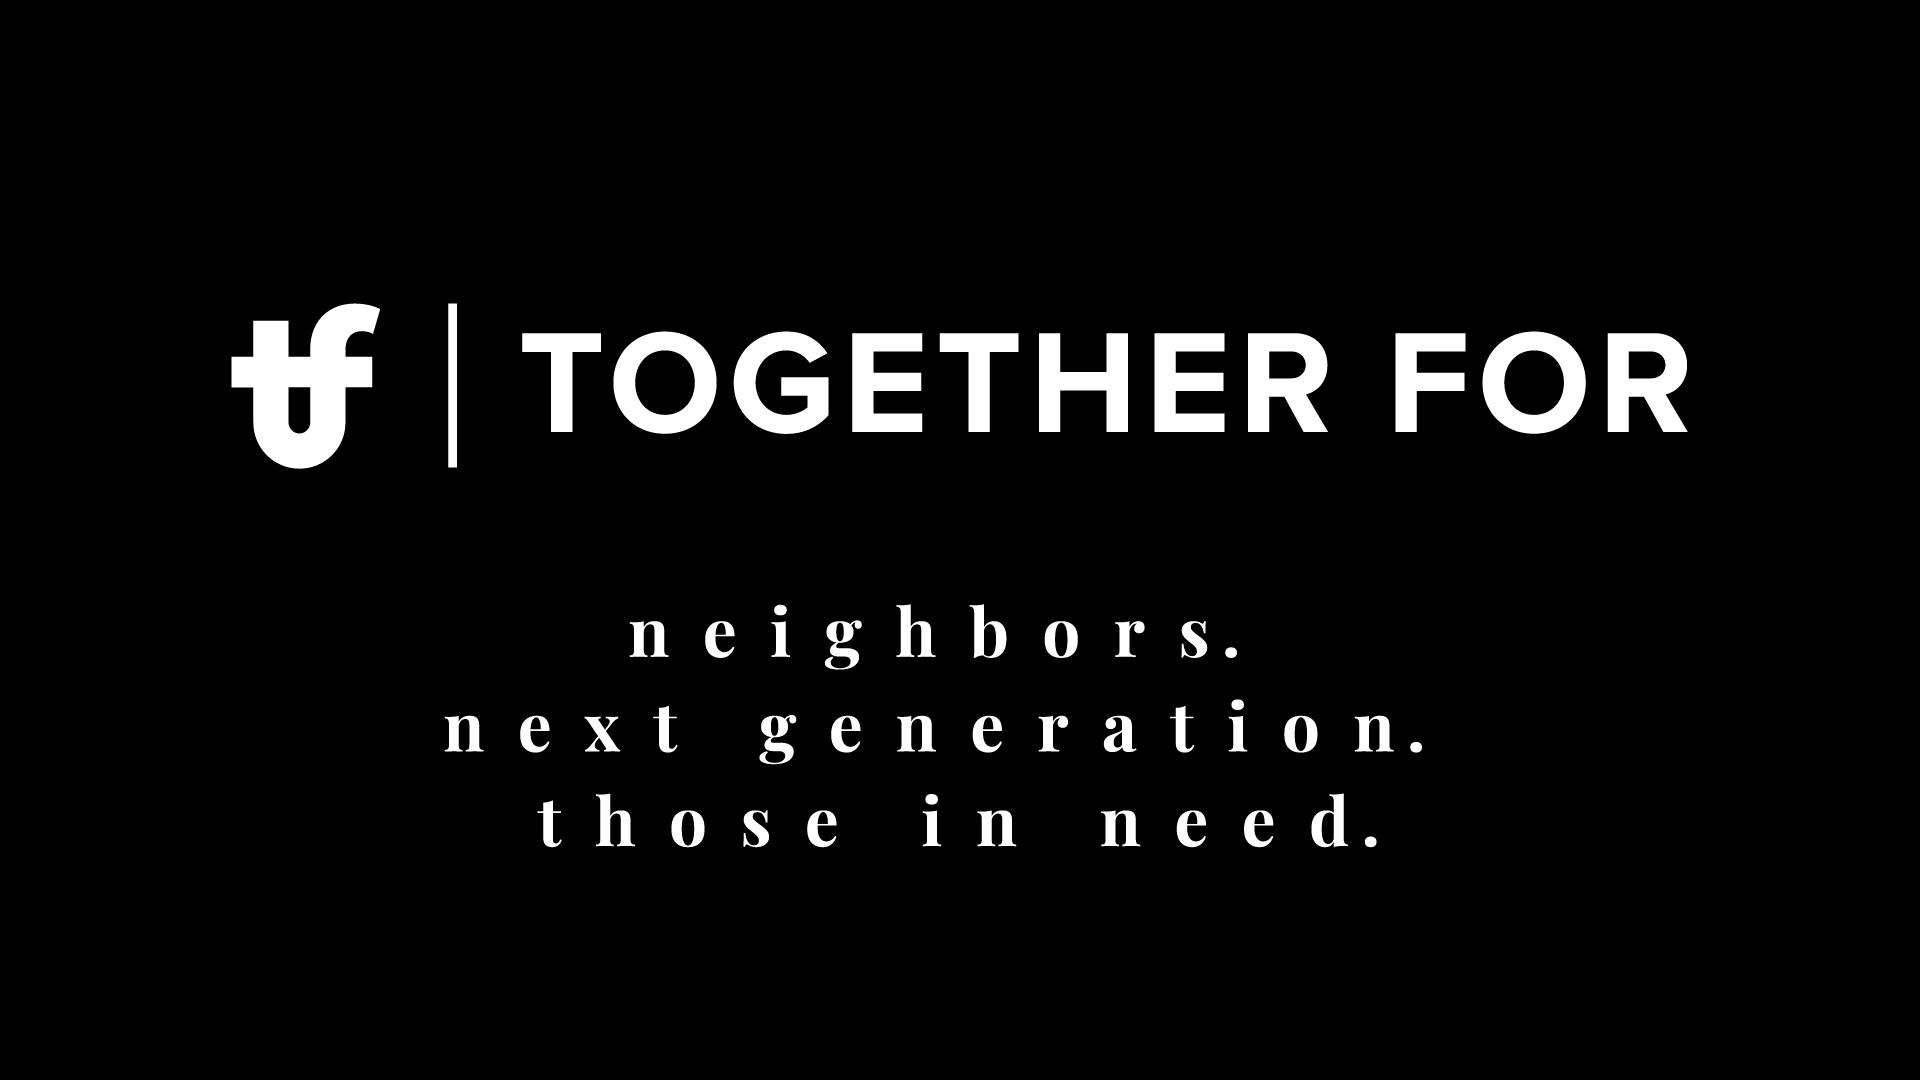 Together For Those in Need